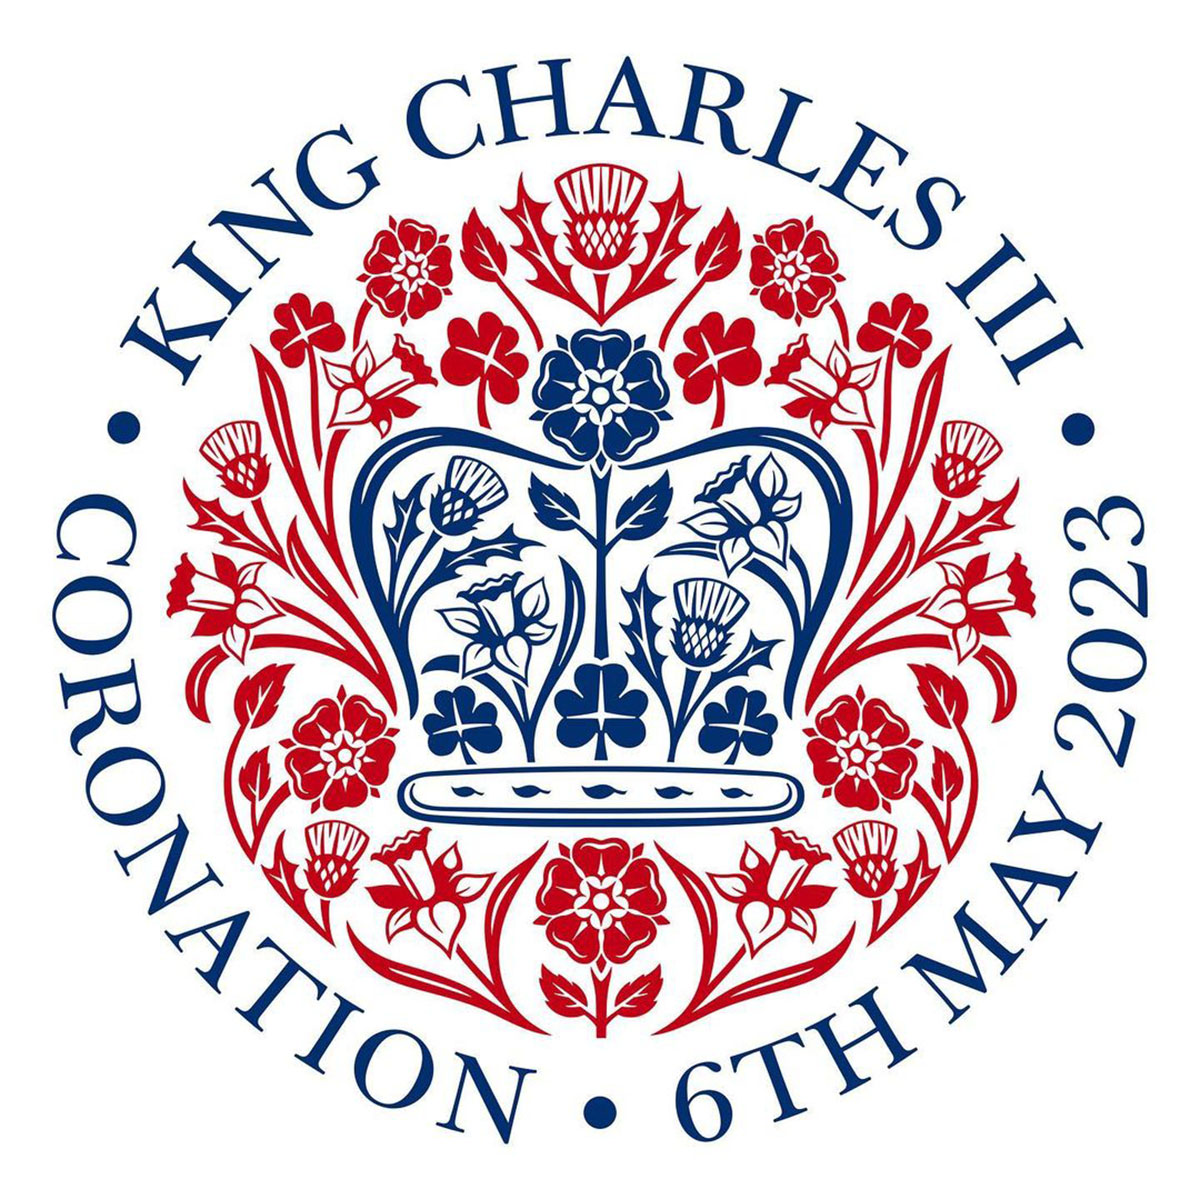 Emblem for the Coronation of King Charles III